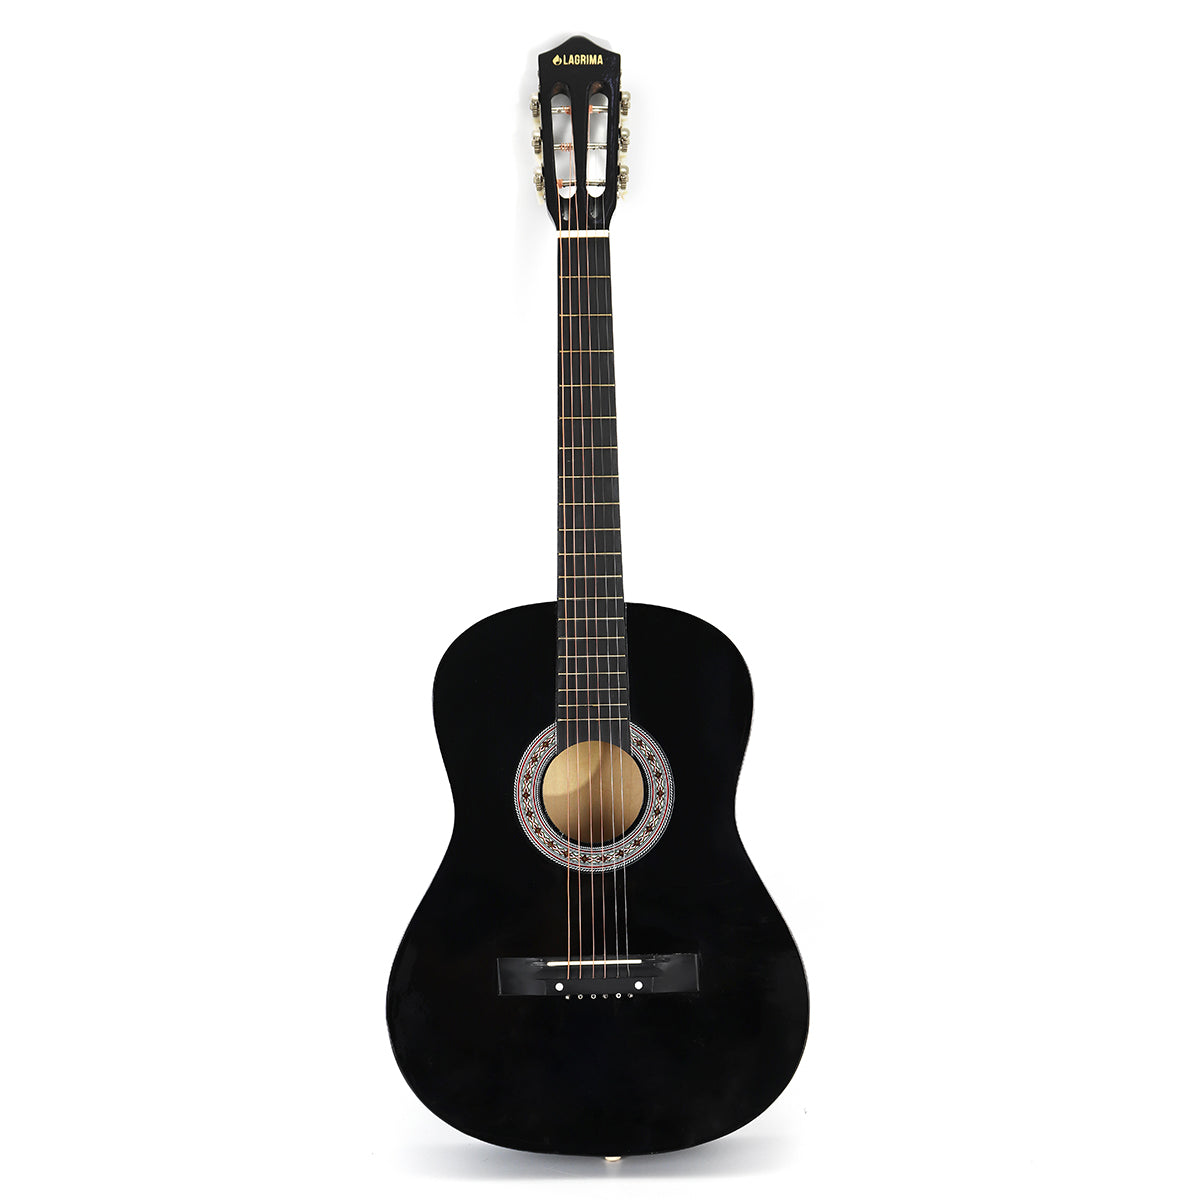 Best acoustic guitar for beginners